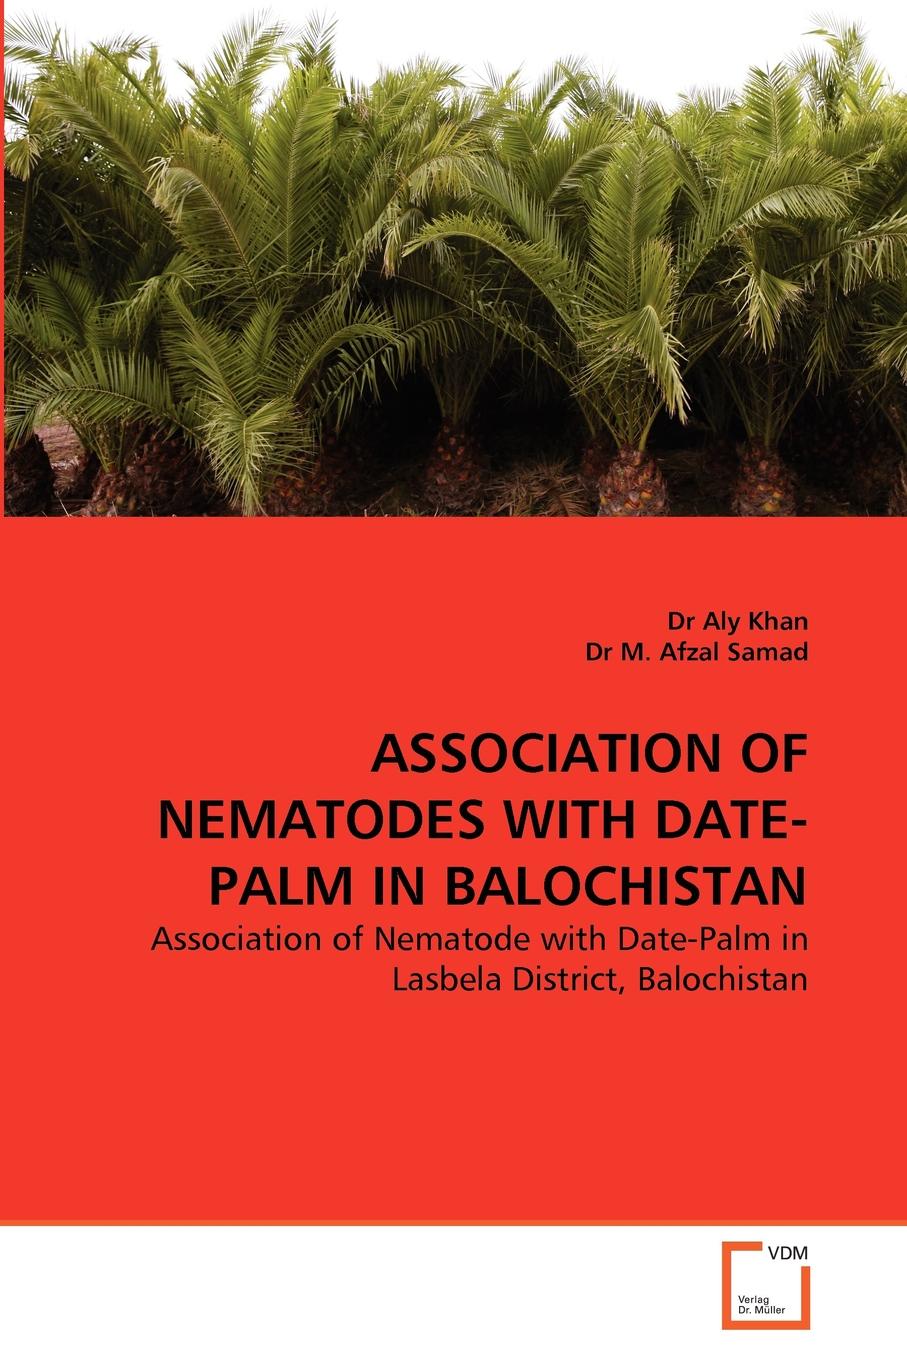 ASSOCIATION OF NEMATODES WITH DATE-PALM IN BALOCHISTAN